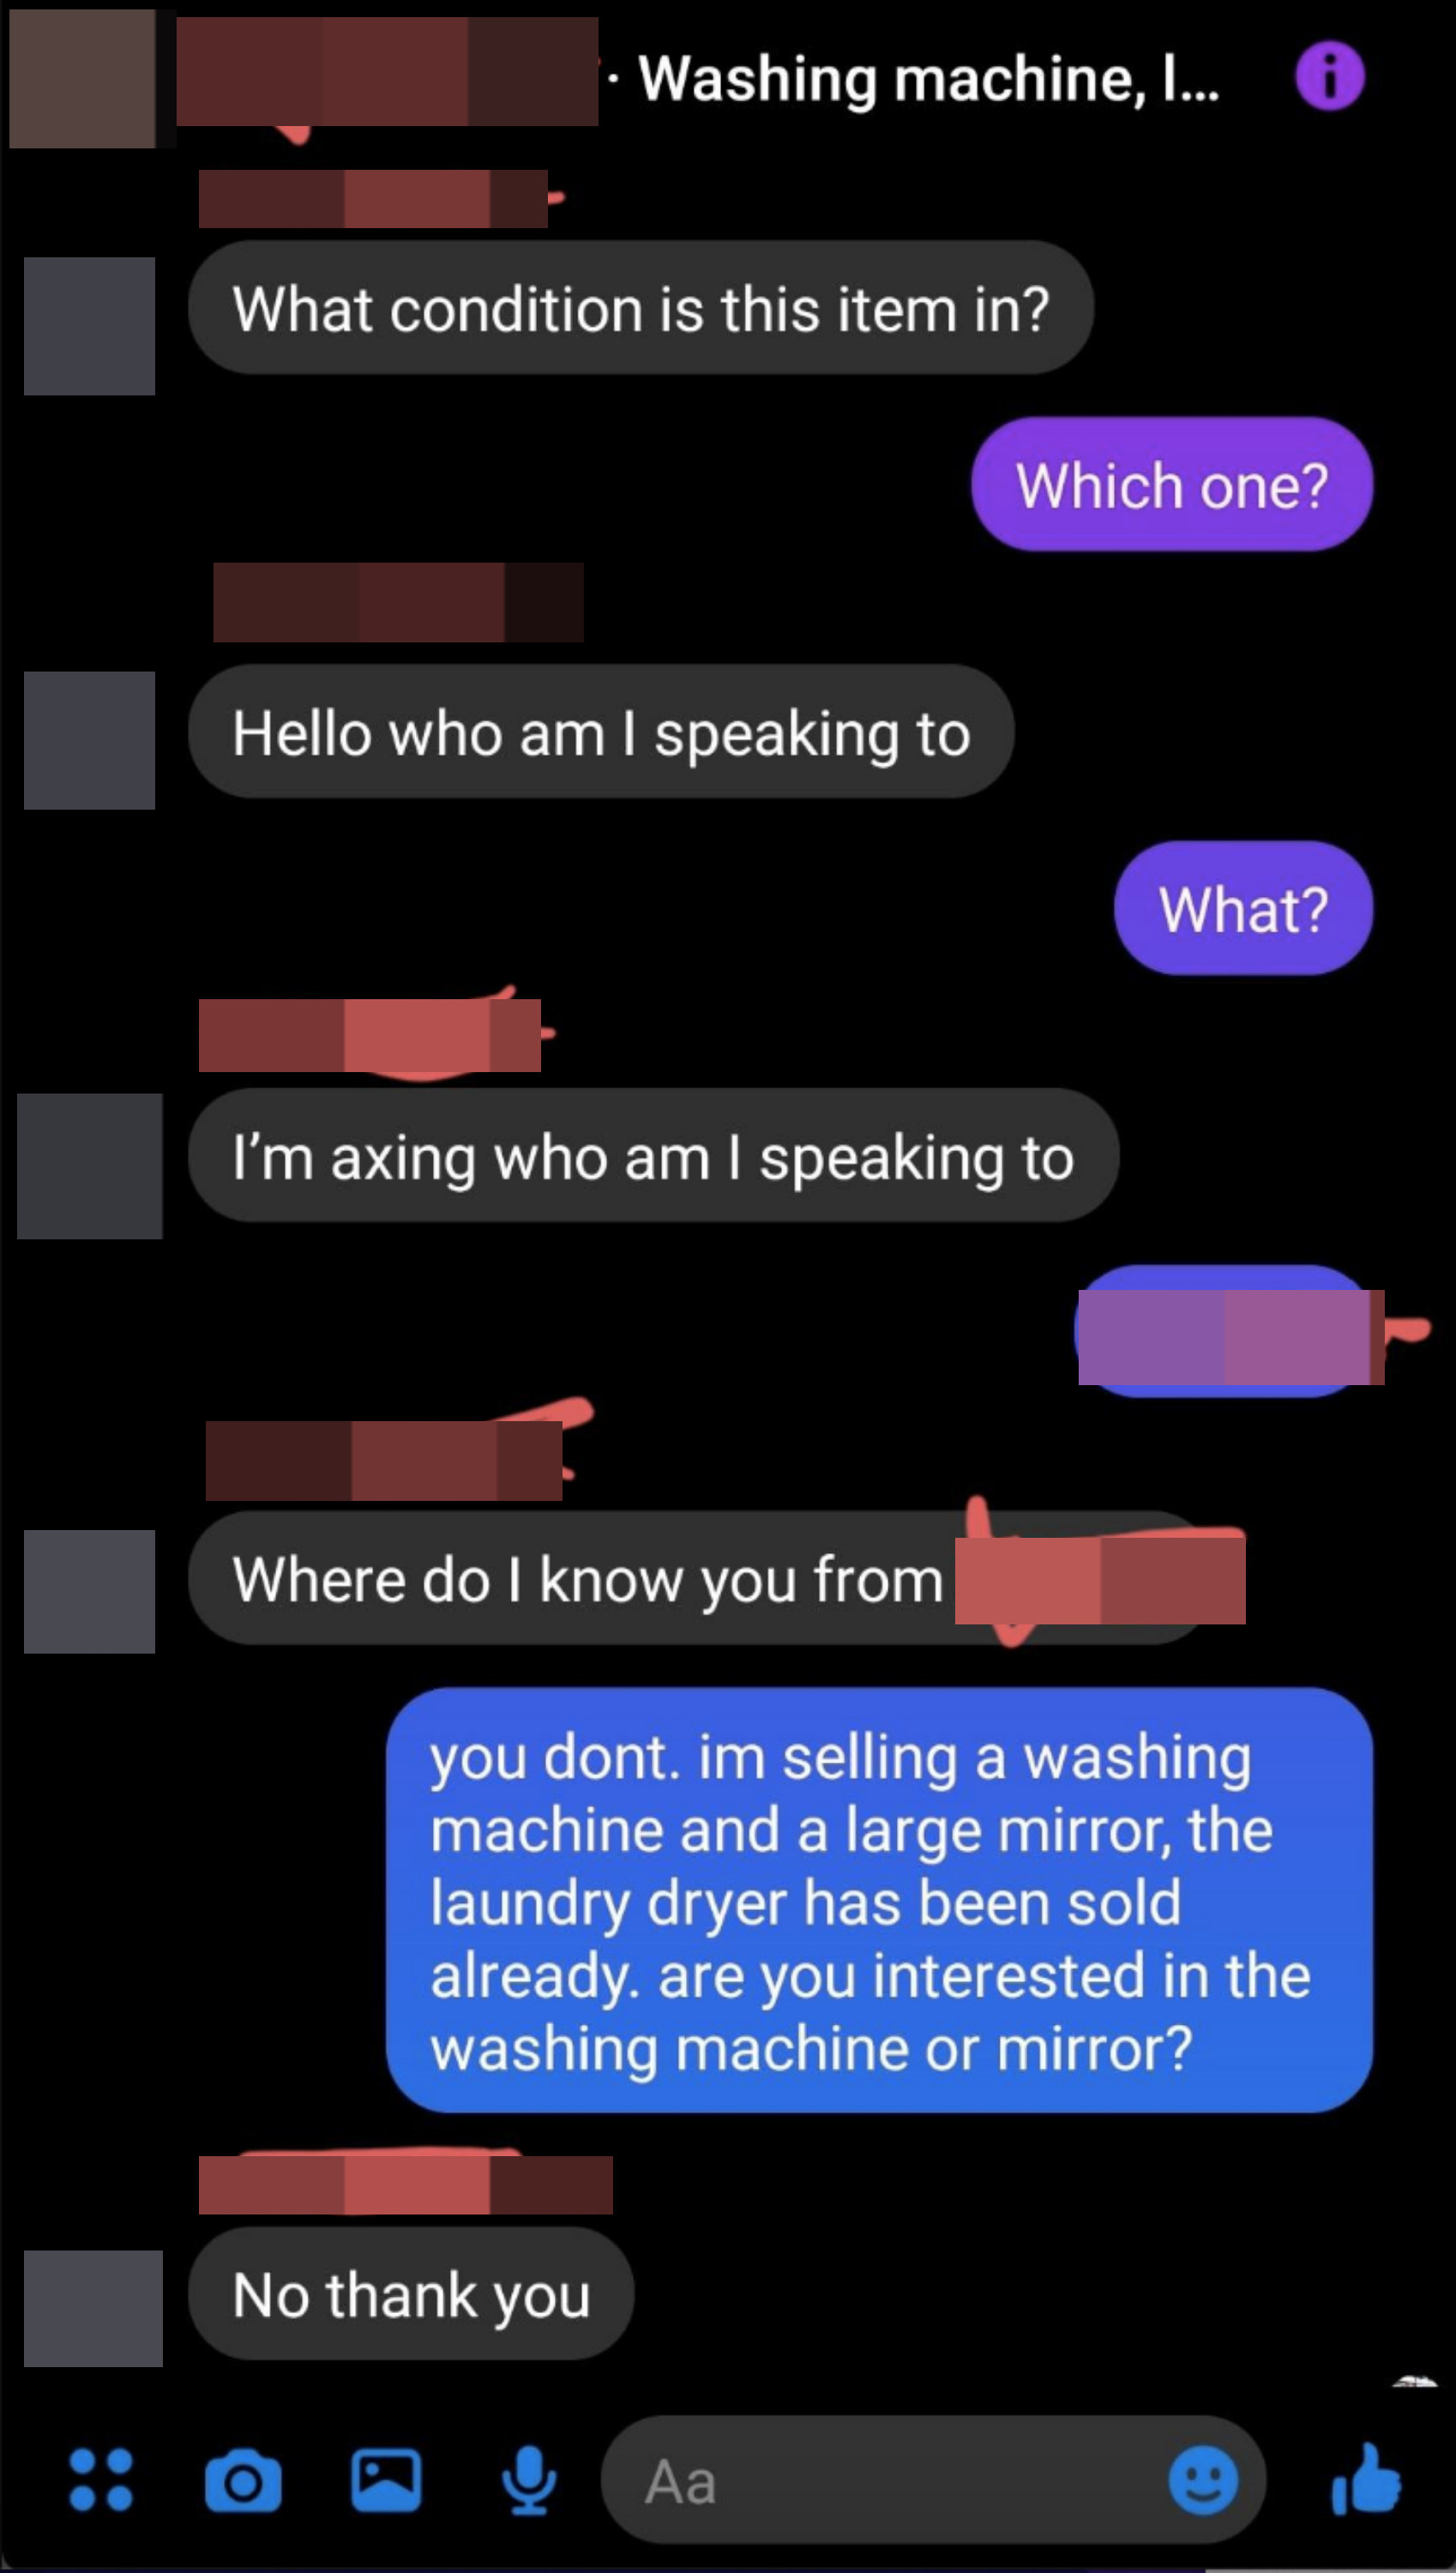 Person asks if they know the person they&#x27;re texting with, and when the person says they don&#x27;t—they&#x27;re selling a washing machine and mirror, and asks if they&#x27;re interested—the person says &quot;no thank you&quot;